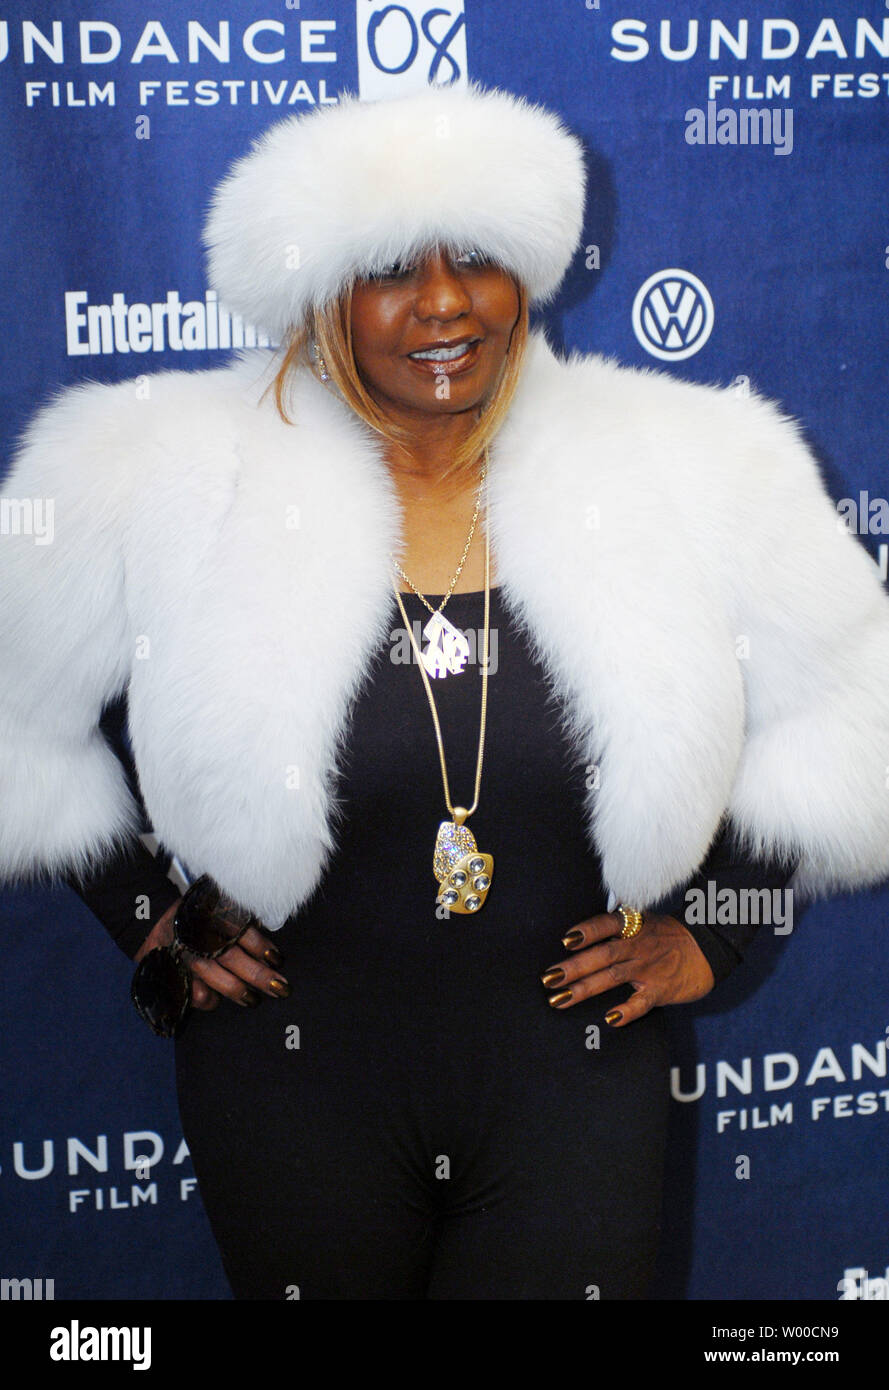 Janice Combs, mother of Sean Combs, attends the premiere of Sean's film 'A Raisin in the Sun' at the Eccles Theater during the Sundance Film Festival in Park City, Utah on January 23, 2008. (UPI Photo/Alexis C. Glenn) Stock Photo